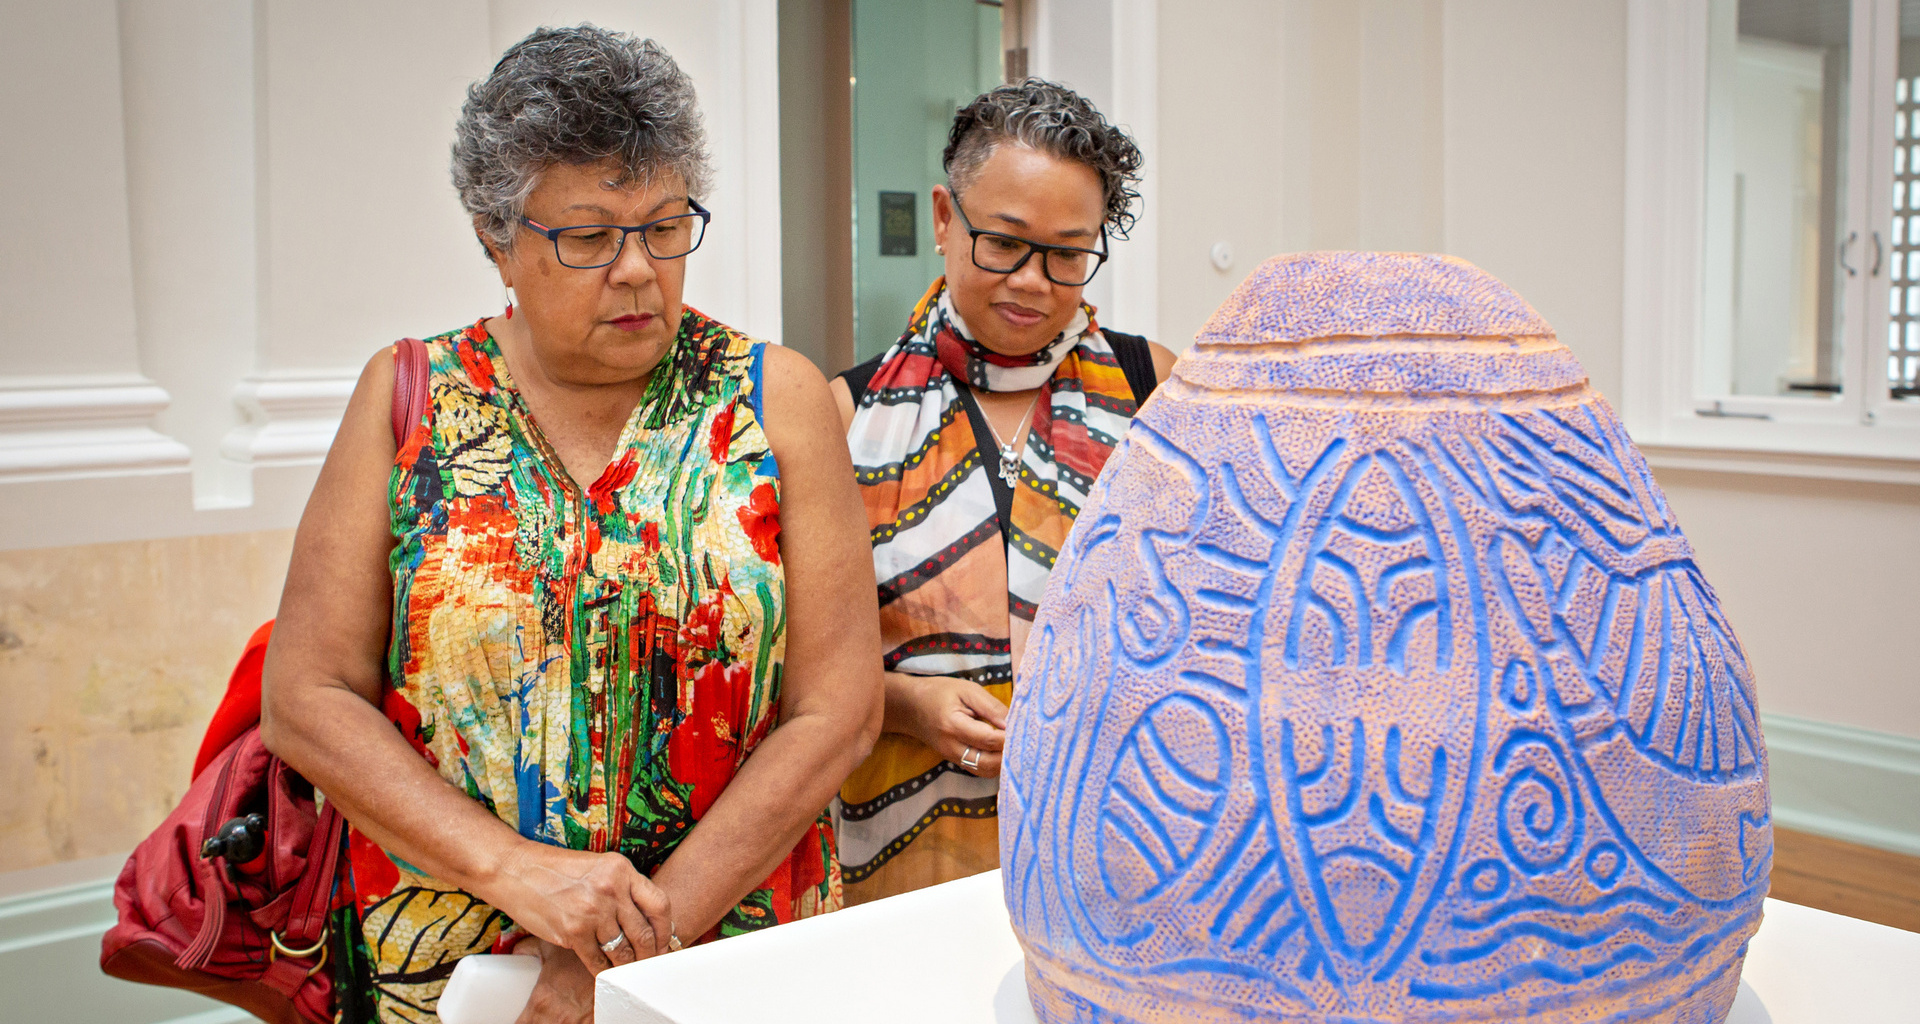 Two women reading information about a ceramic art piece, decorated with traditional patterns